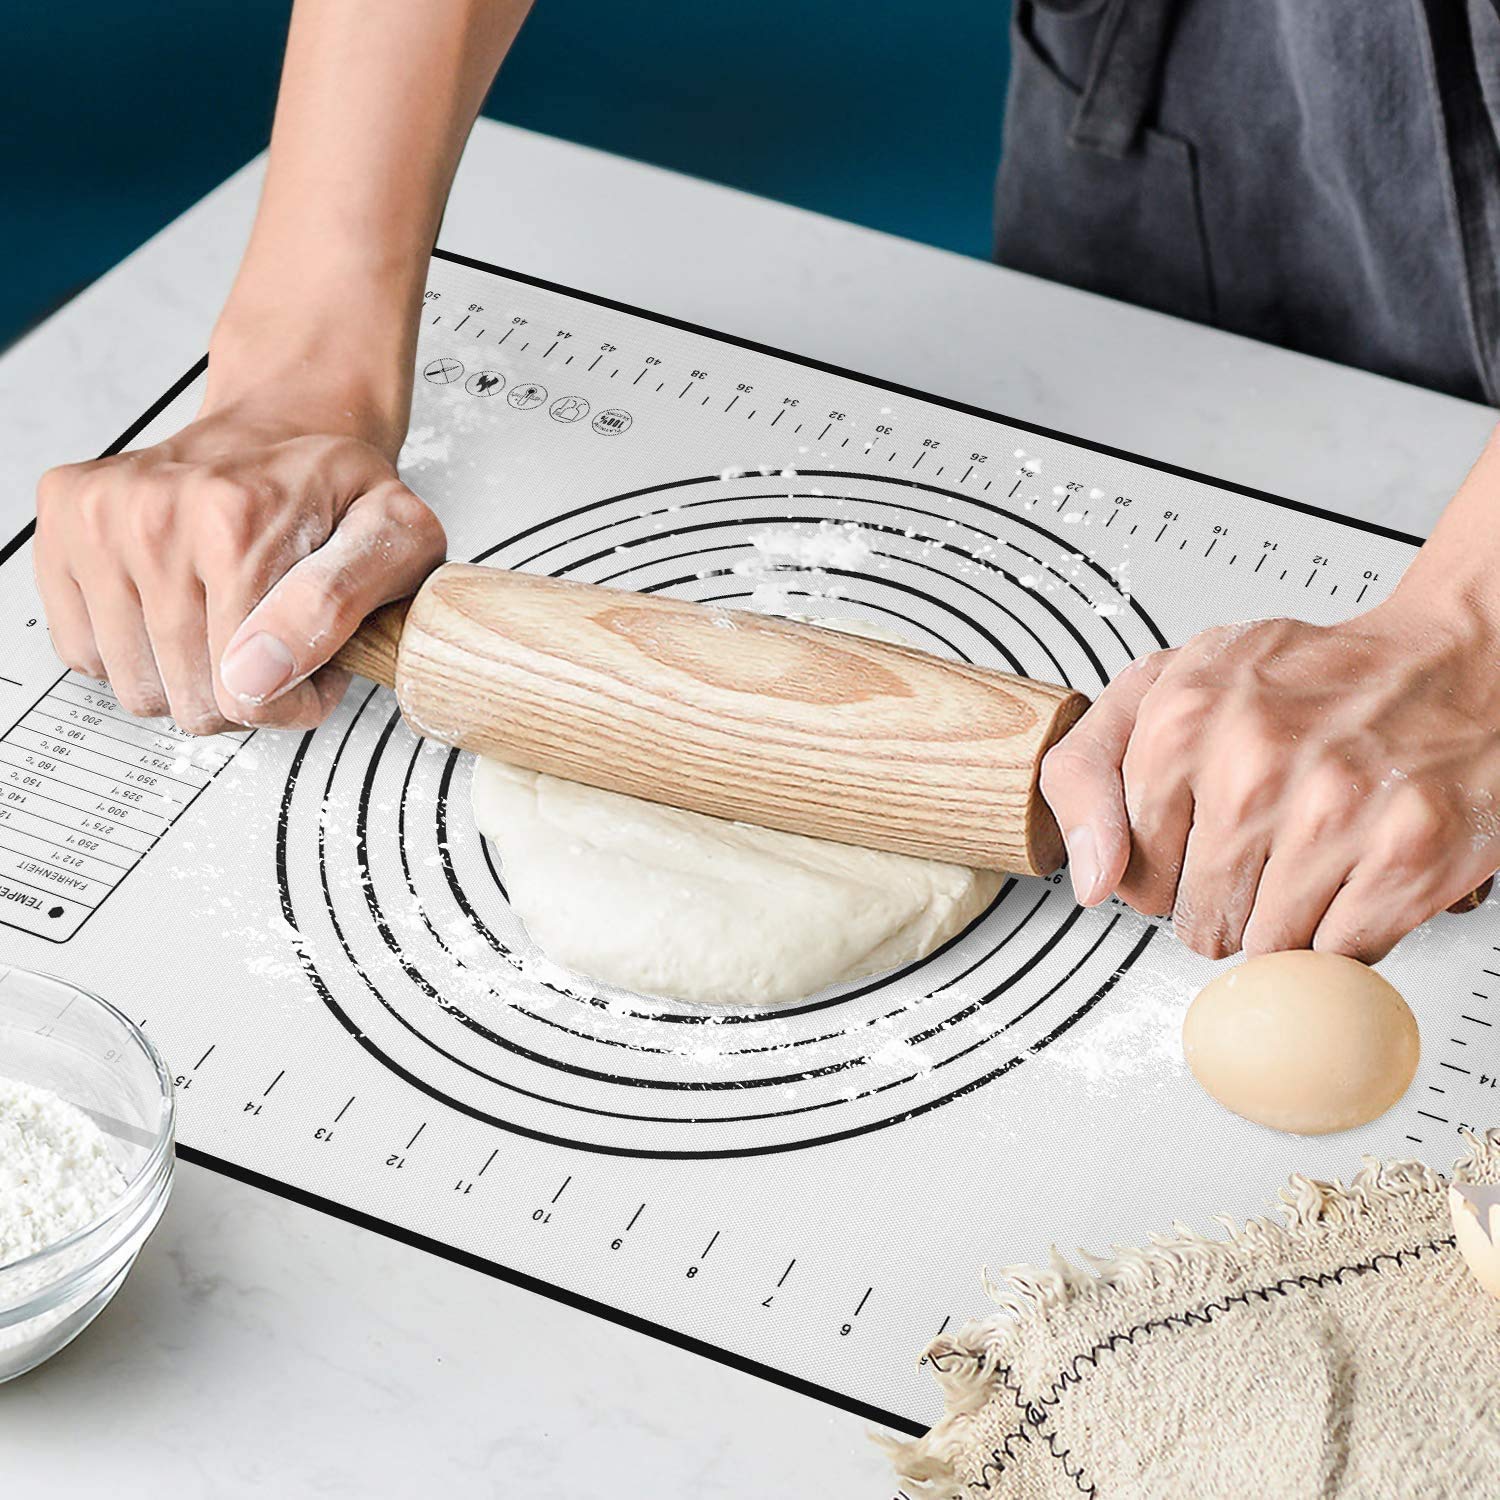 Silicone Baking Mat, Non-Stick Pastry Mat Extra Large with Measurements for Baking - Pizza Dough Rolling Mat, Counter Mat, Heat-Resistance, Size: 15.7